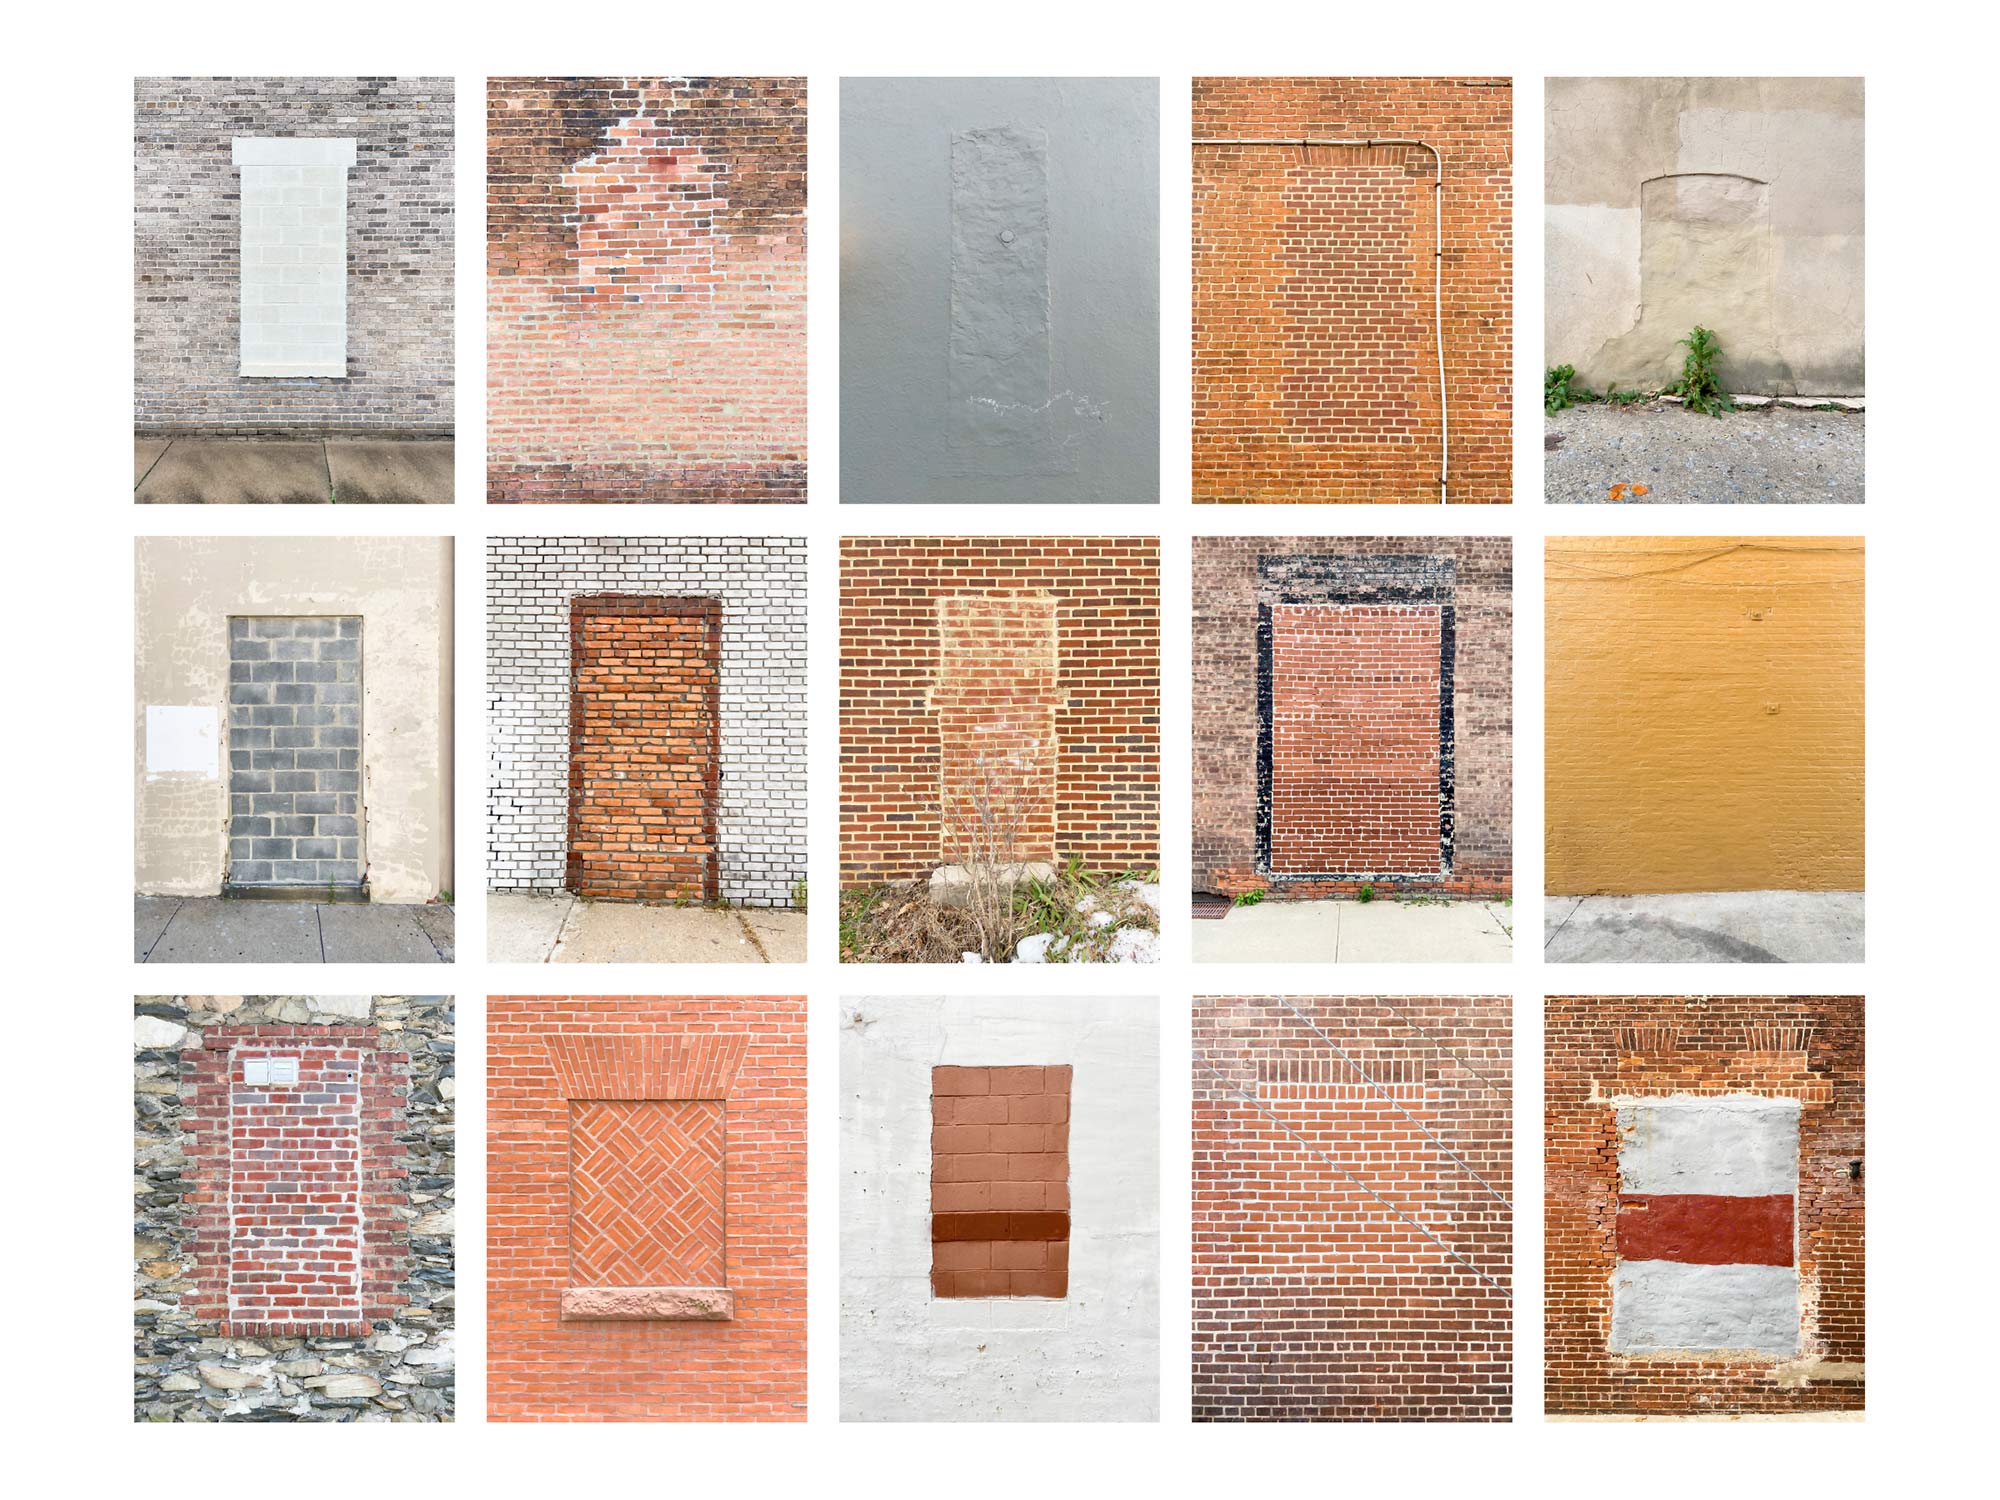 Fine art photos documenting bricked up windows, doors, and architectural openings by artist and designer Bruce Willen